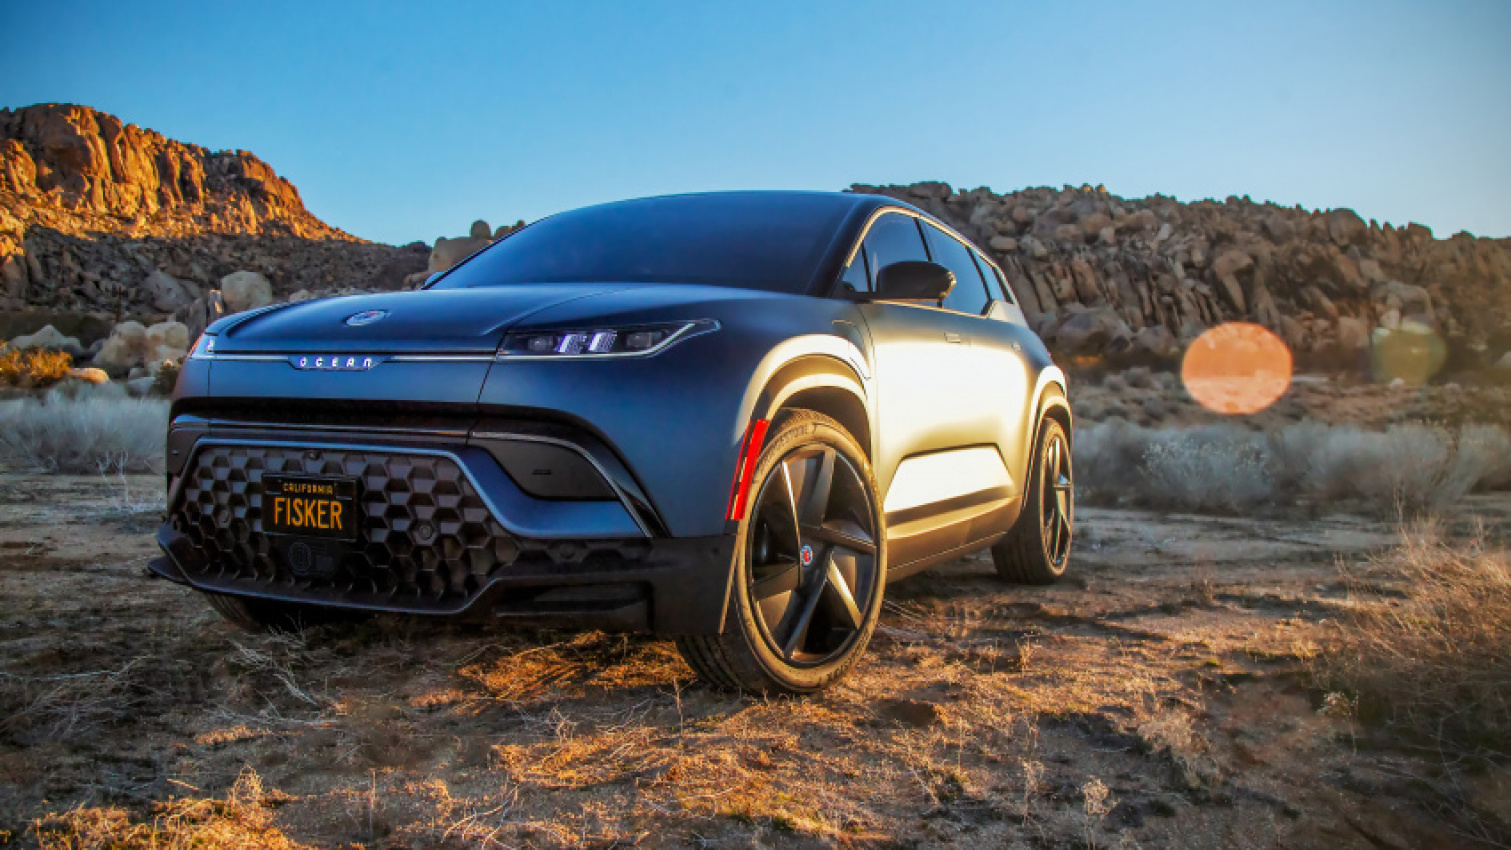 auto, electric vehicle, fisker, gadgets, fisker ocean: 8 things i learnt getting up close with the innovative electric vehicle